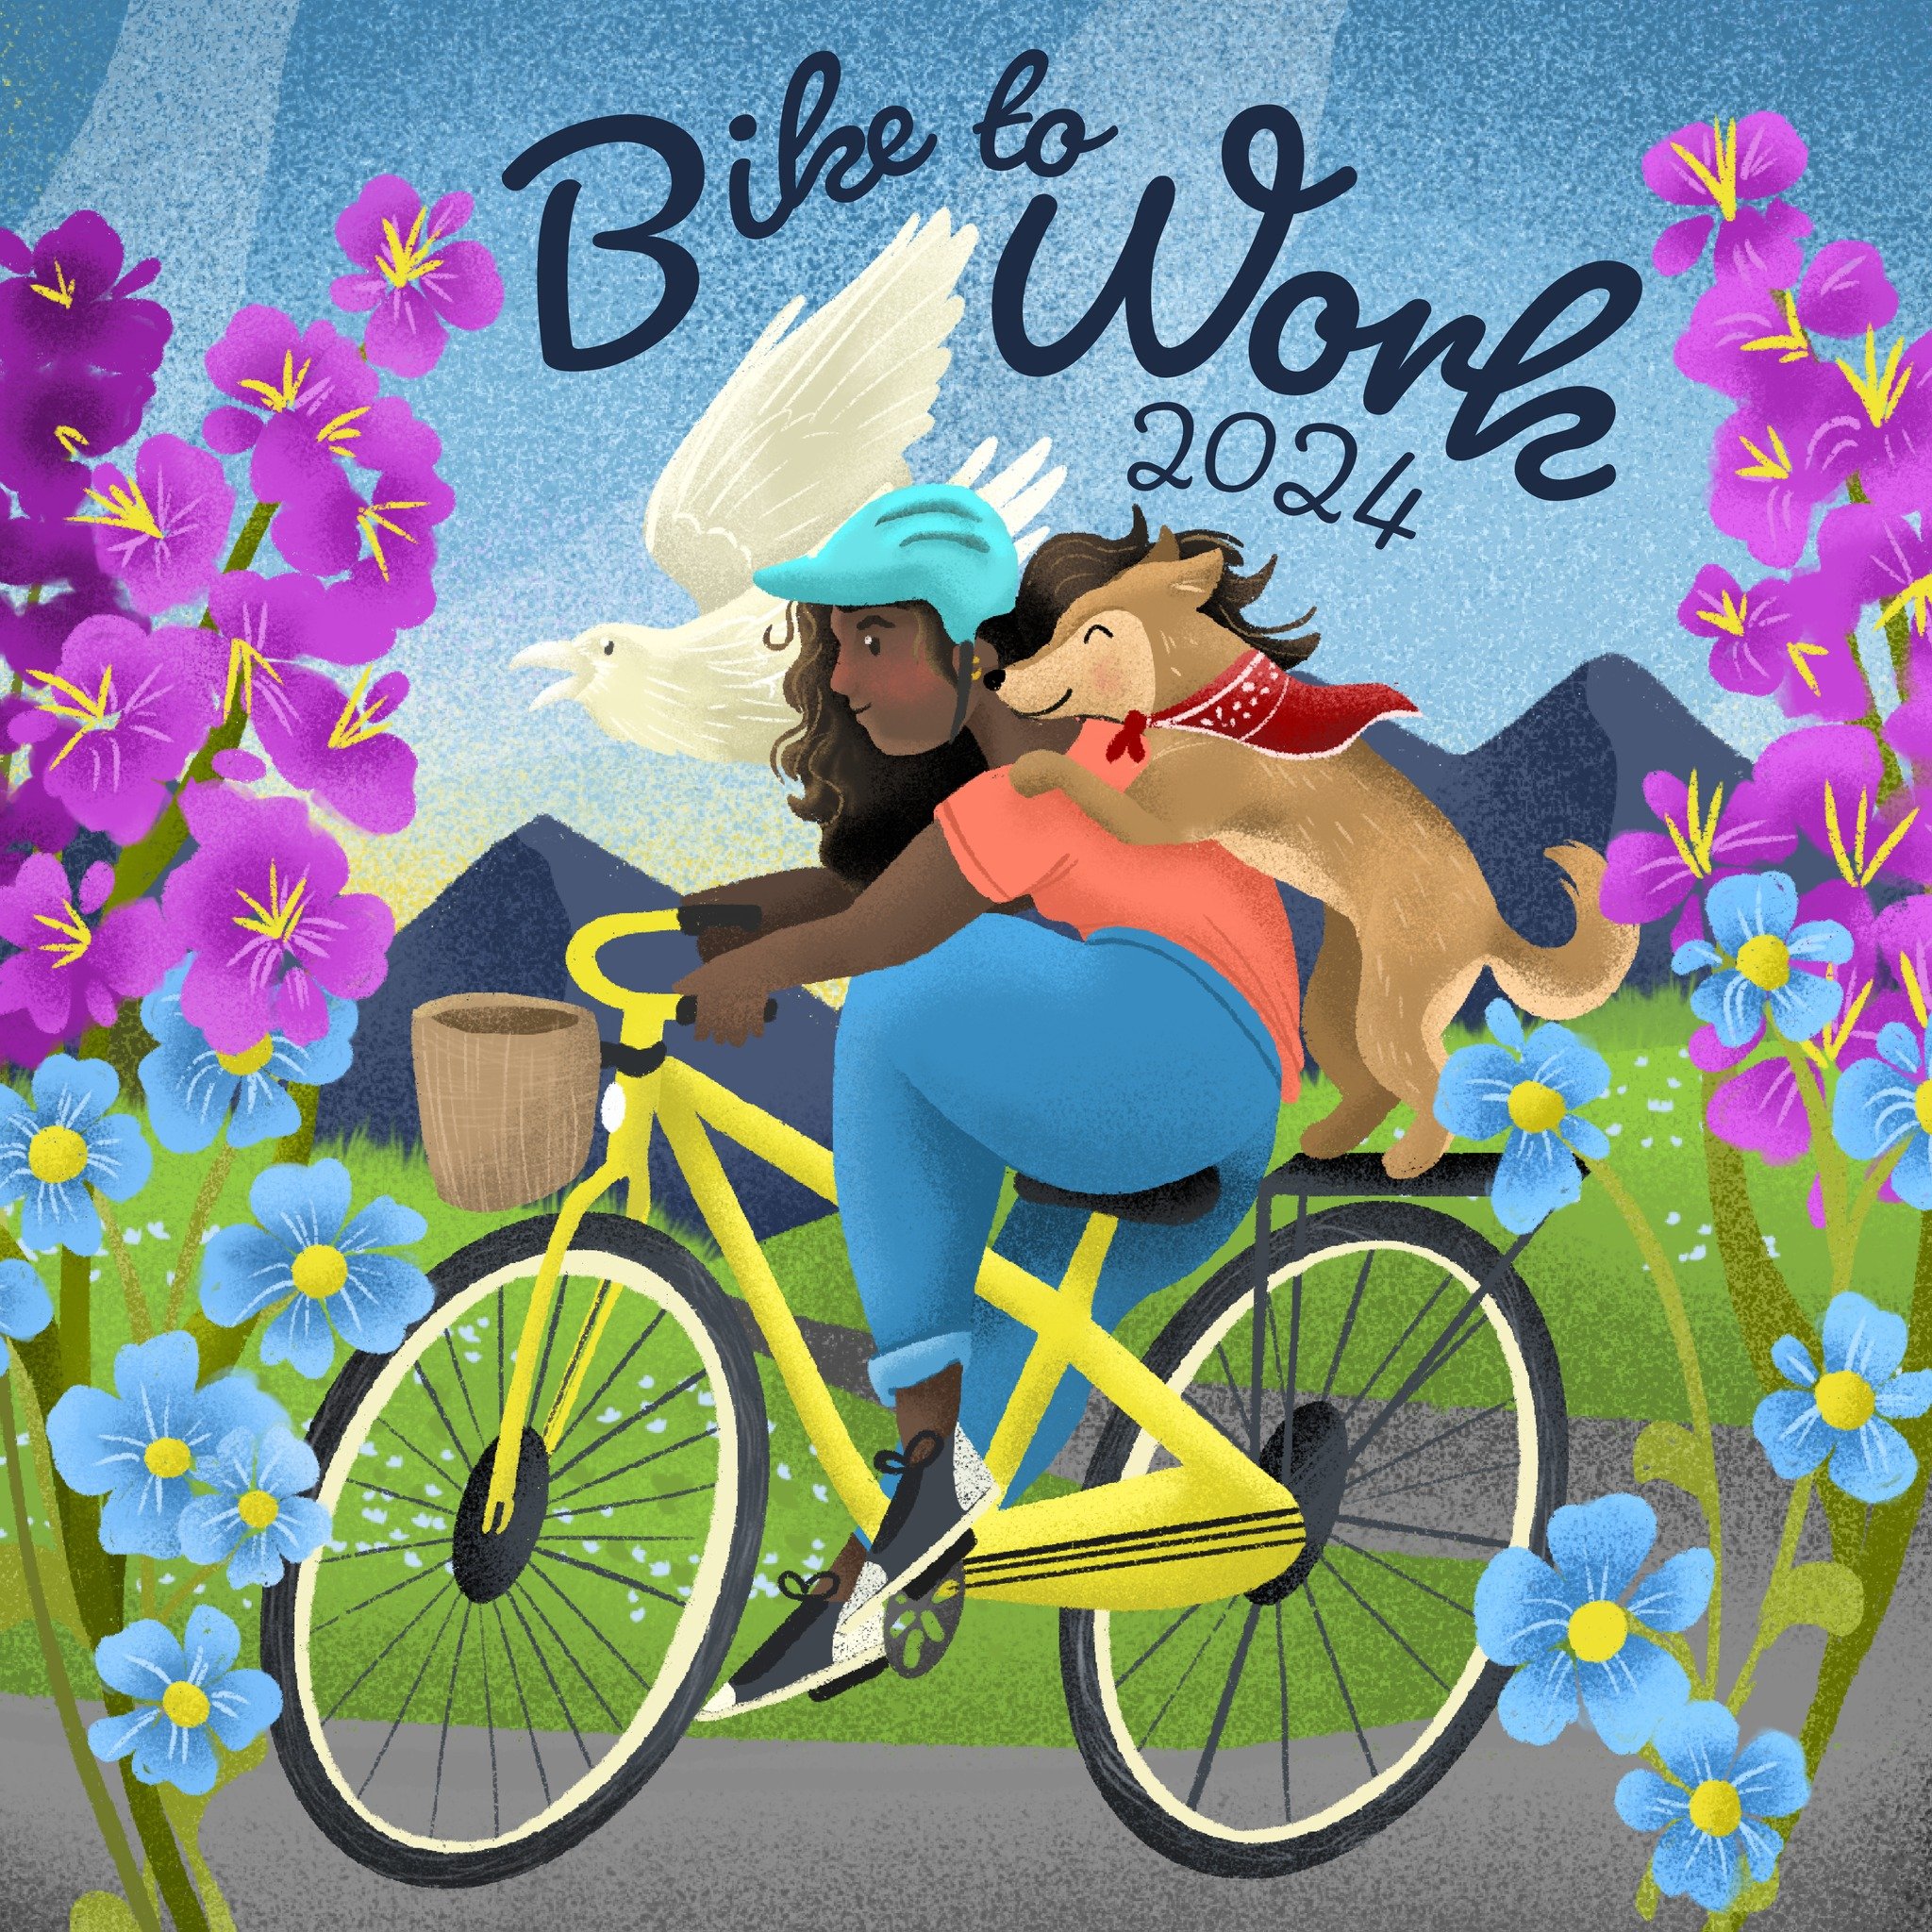 Tomorrow is Bike To Work Day! 🥳🚴&zwj;♀️
Bike on by our treat station at the corner of 4th and L for savory breakfast pudding from 7-9am and 4-6pm.